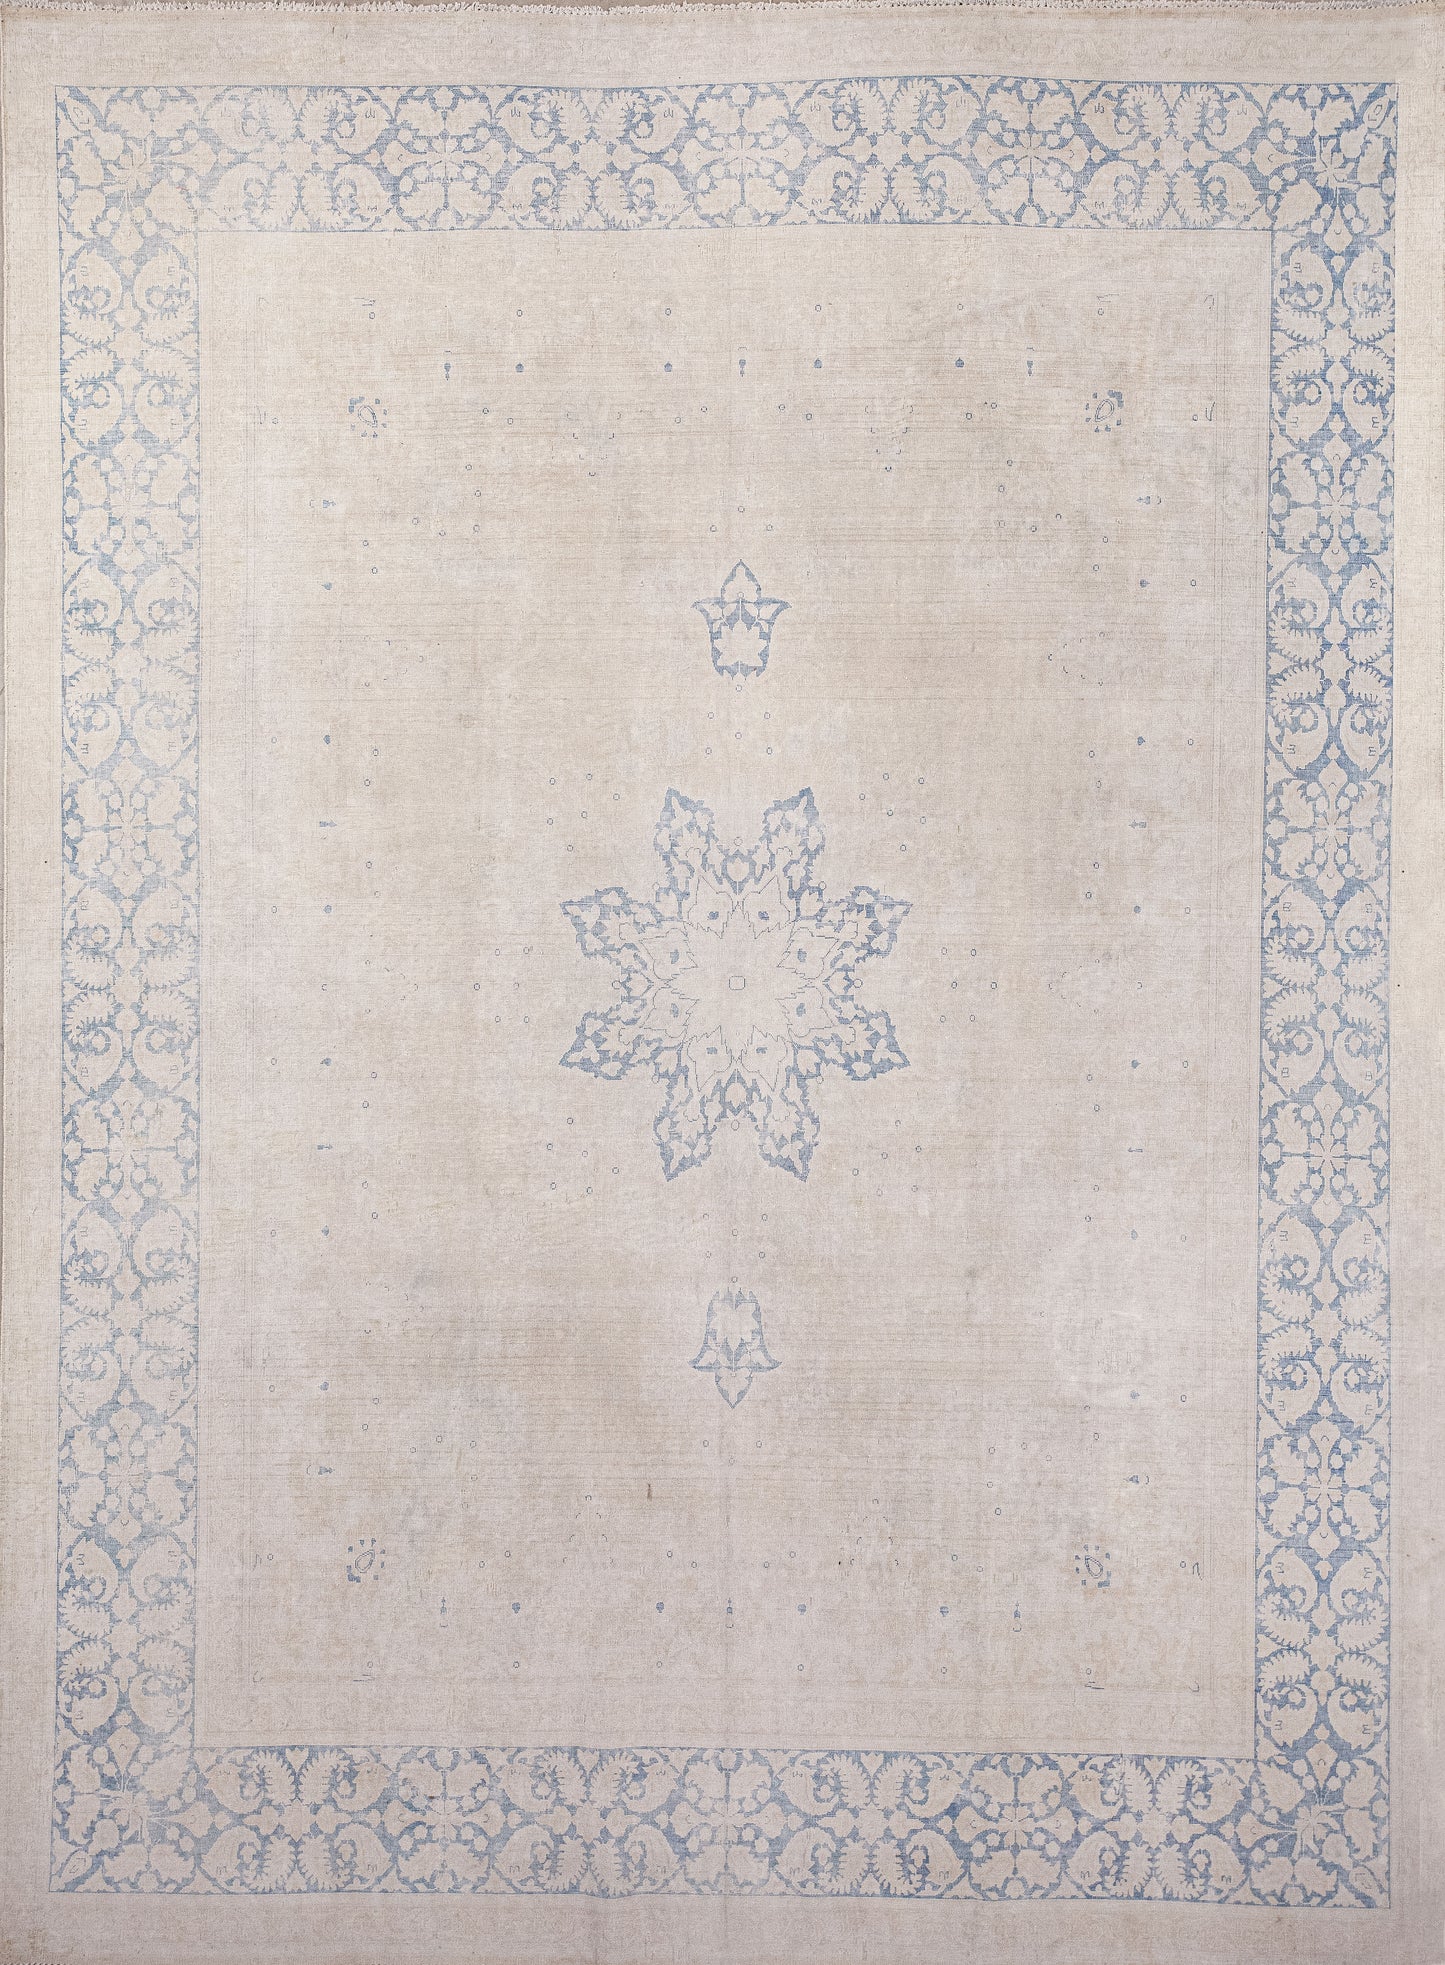 This regal rug was woven in elegant hues that blend with any decoration. The color palette has beige as the dominant color and for the background, while the frame and artwork are displayed in royal blue.